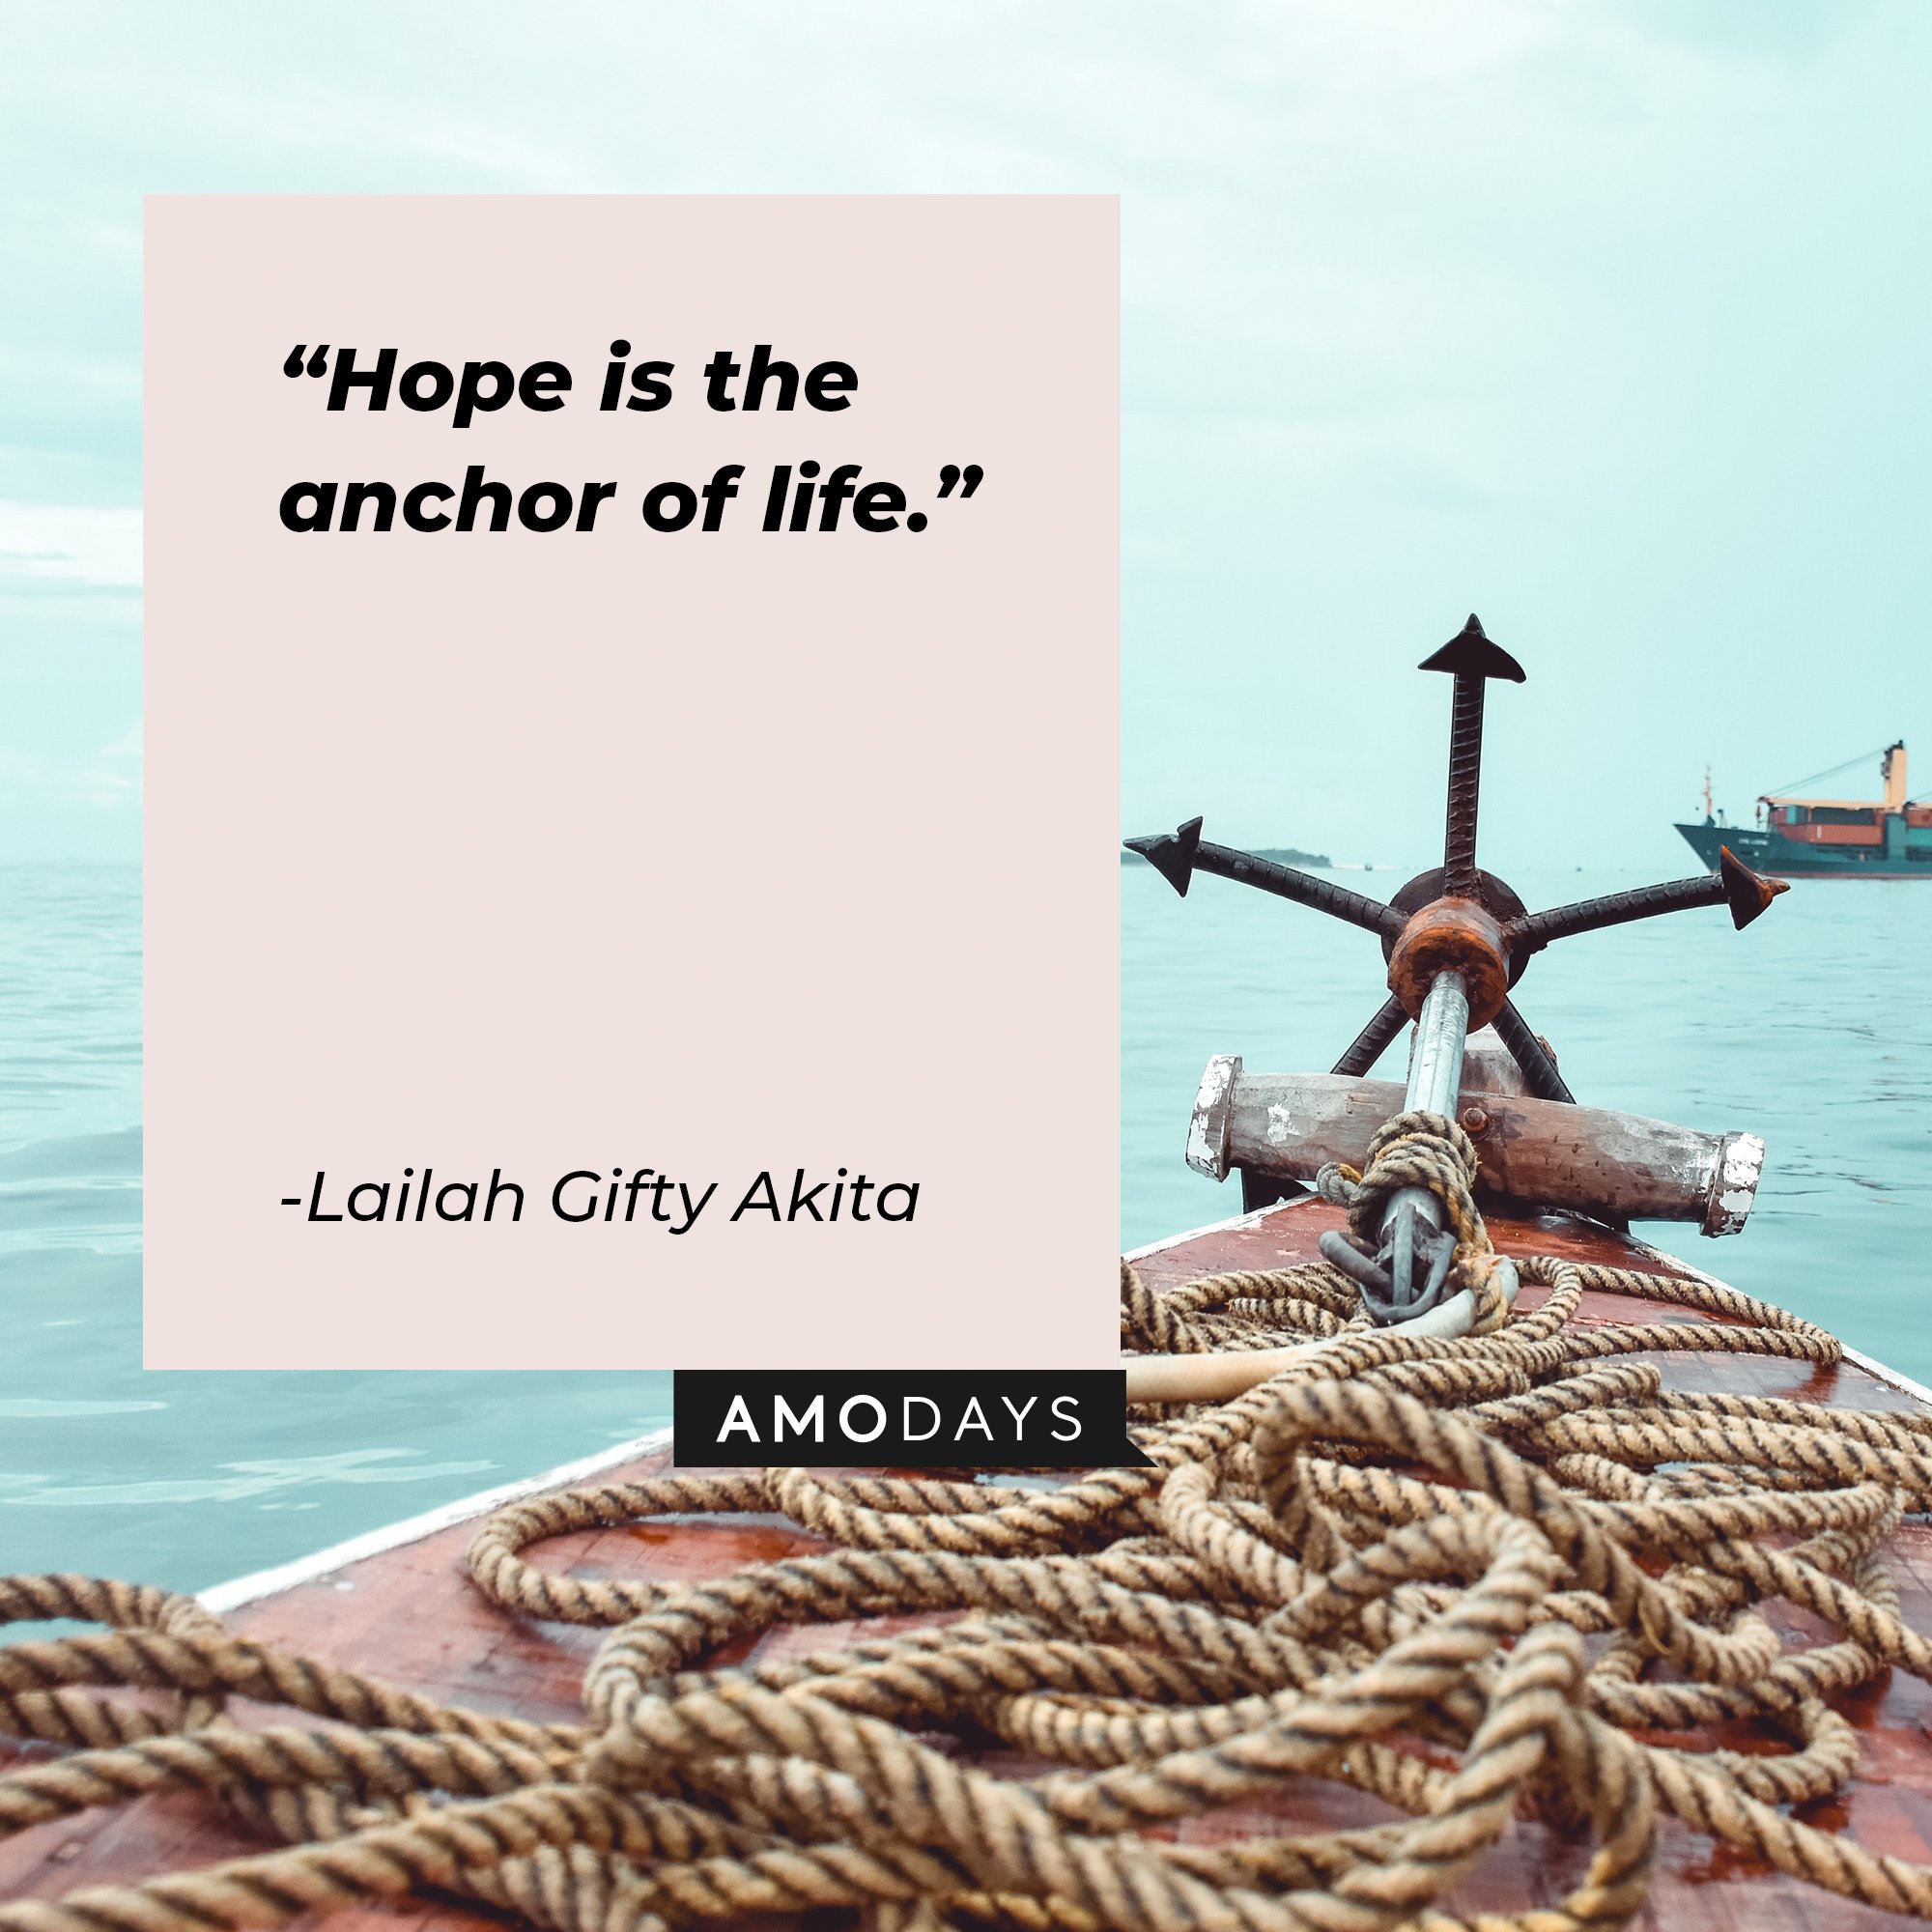 Lailah Gifty Akita's quote: "Hope is the anchor of life." | Image: AmoDays